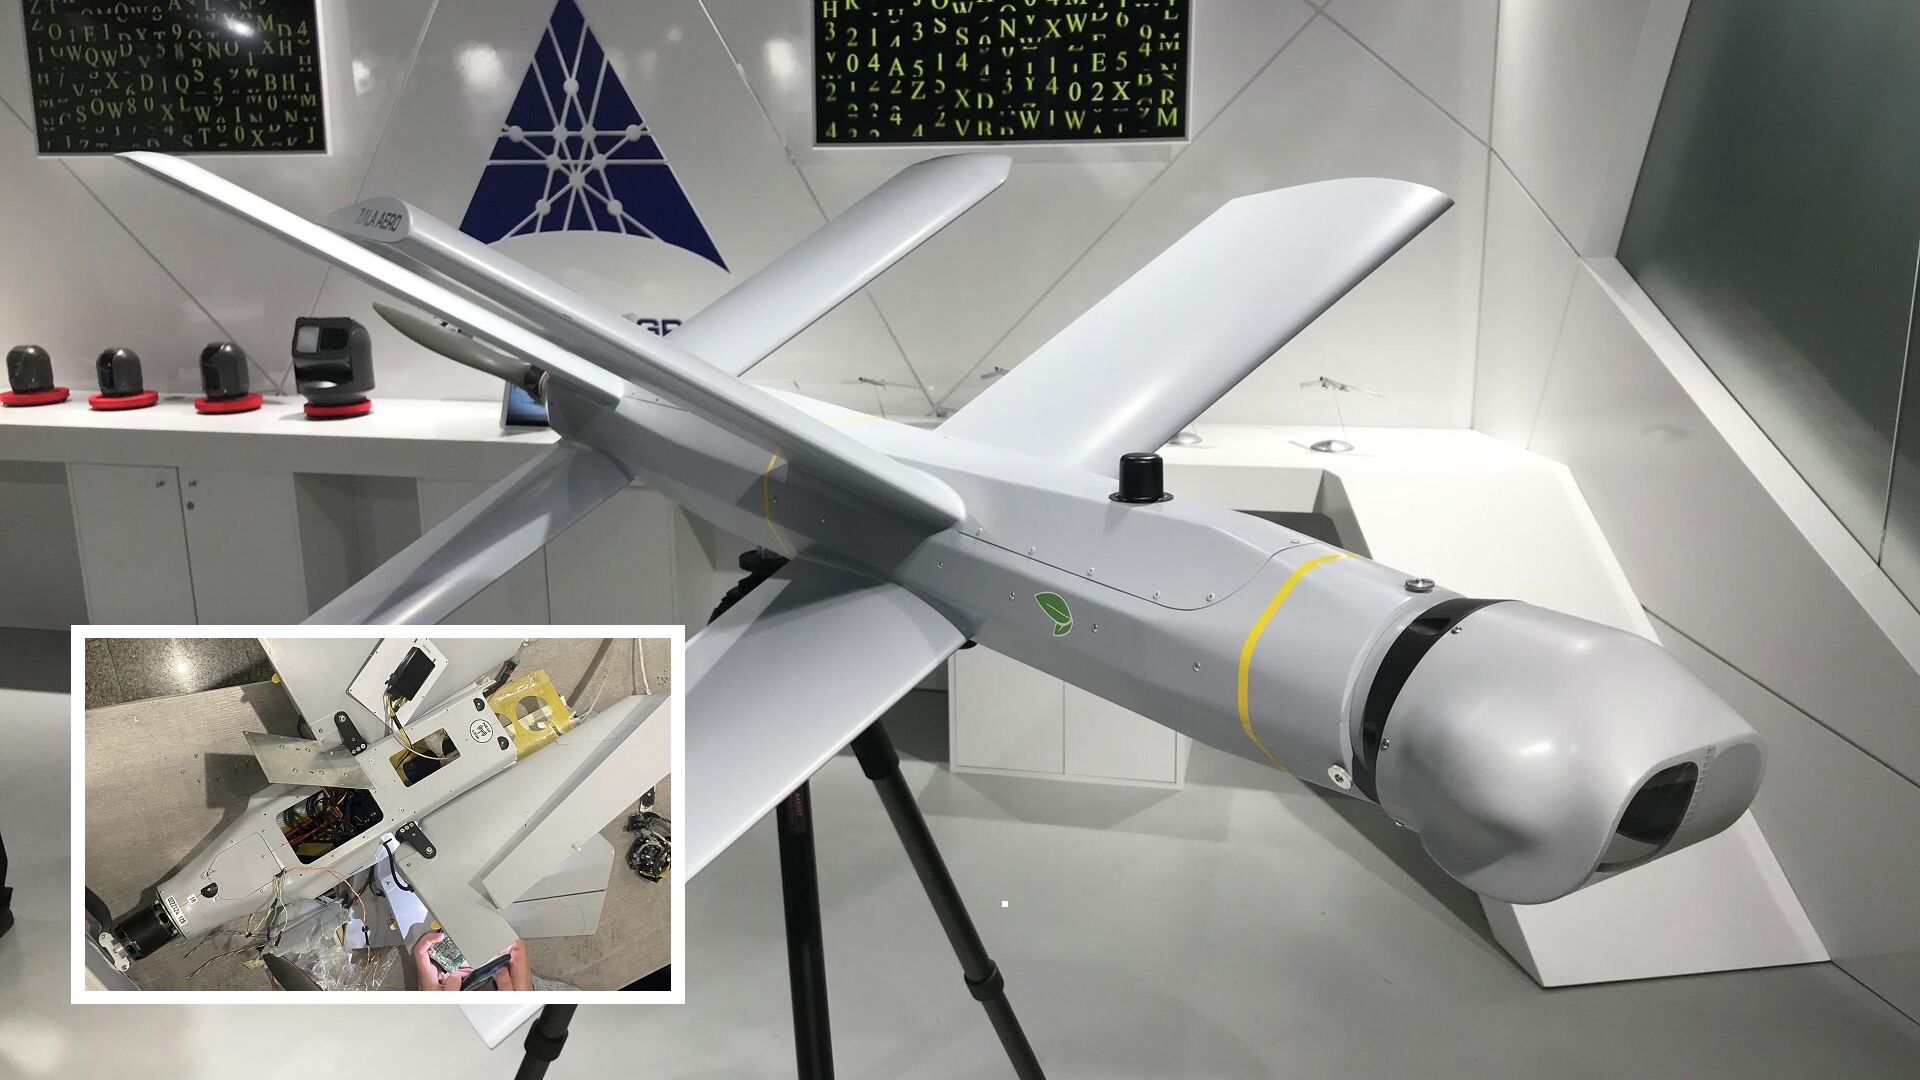 Russia's Lancet kamikaze drone is equipped with an NVIDIA Jetson TX2 computer and an Xilinx Zynq chip